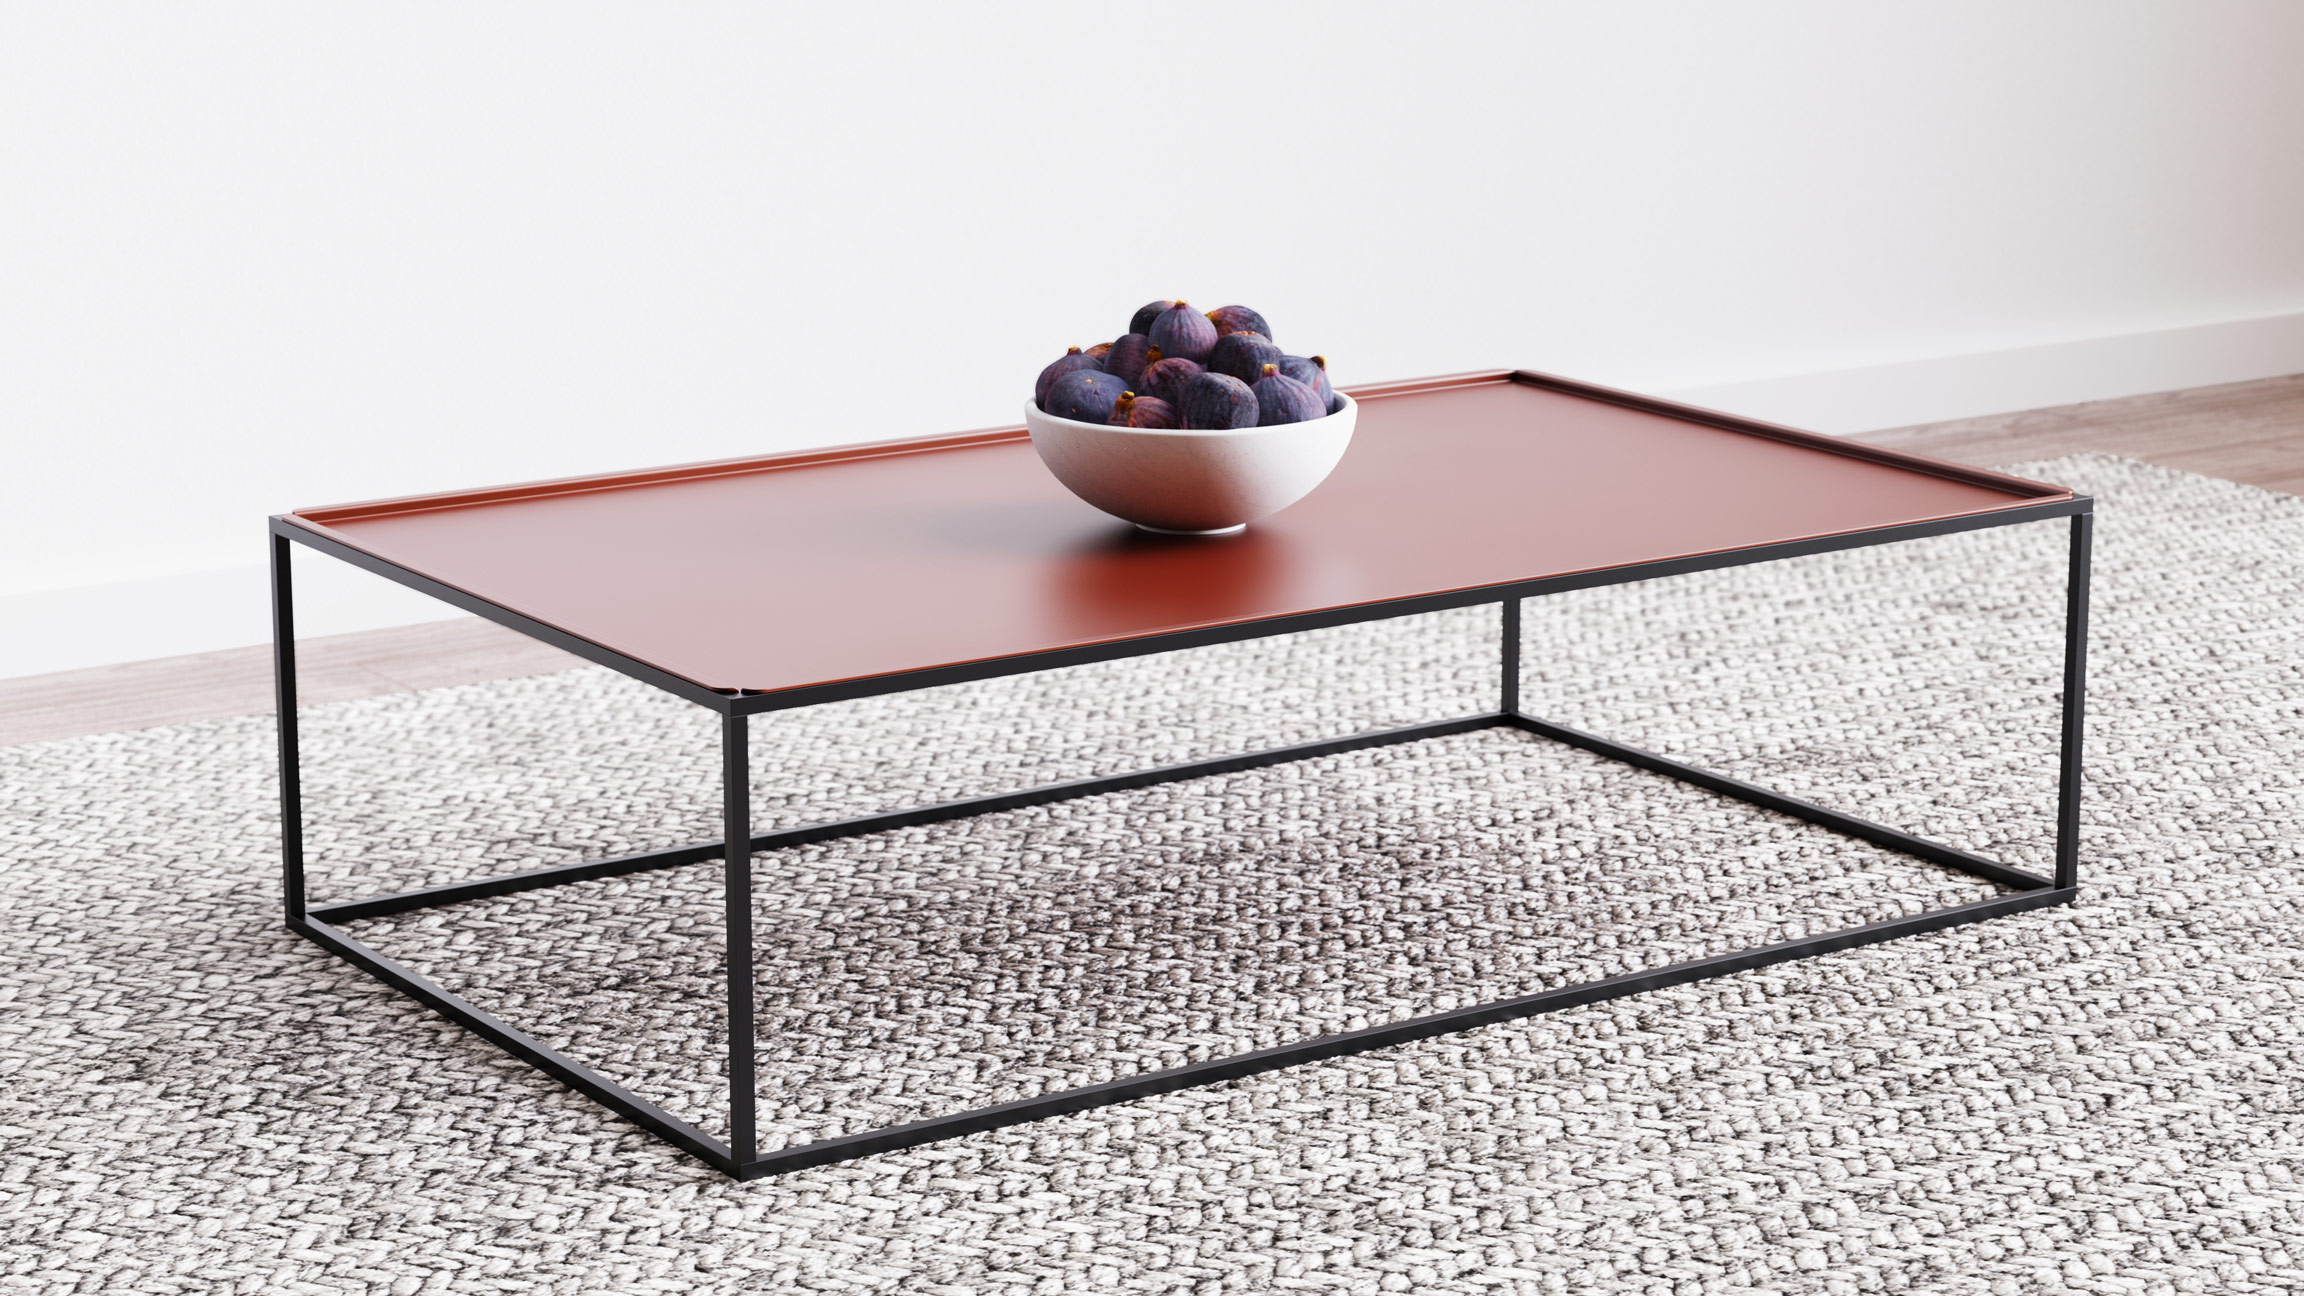 WS - Render - Settle table - 1000x600